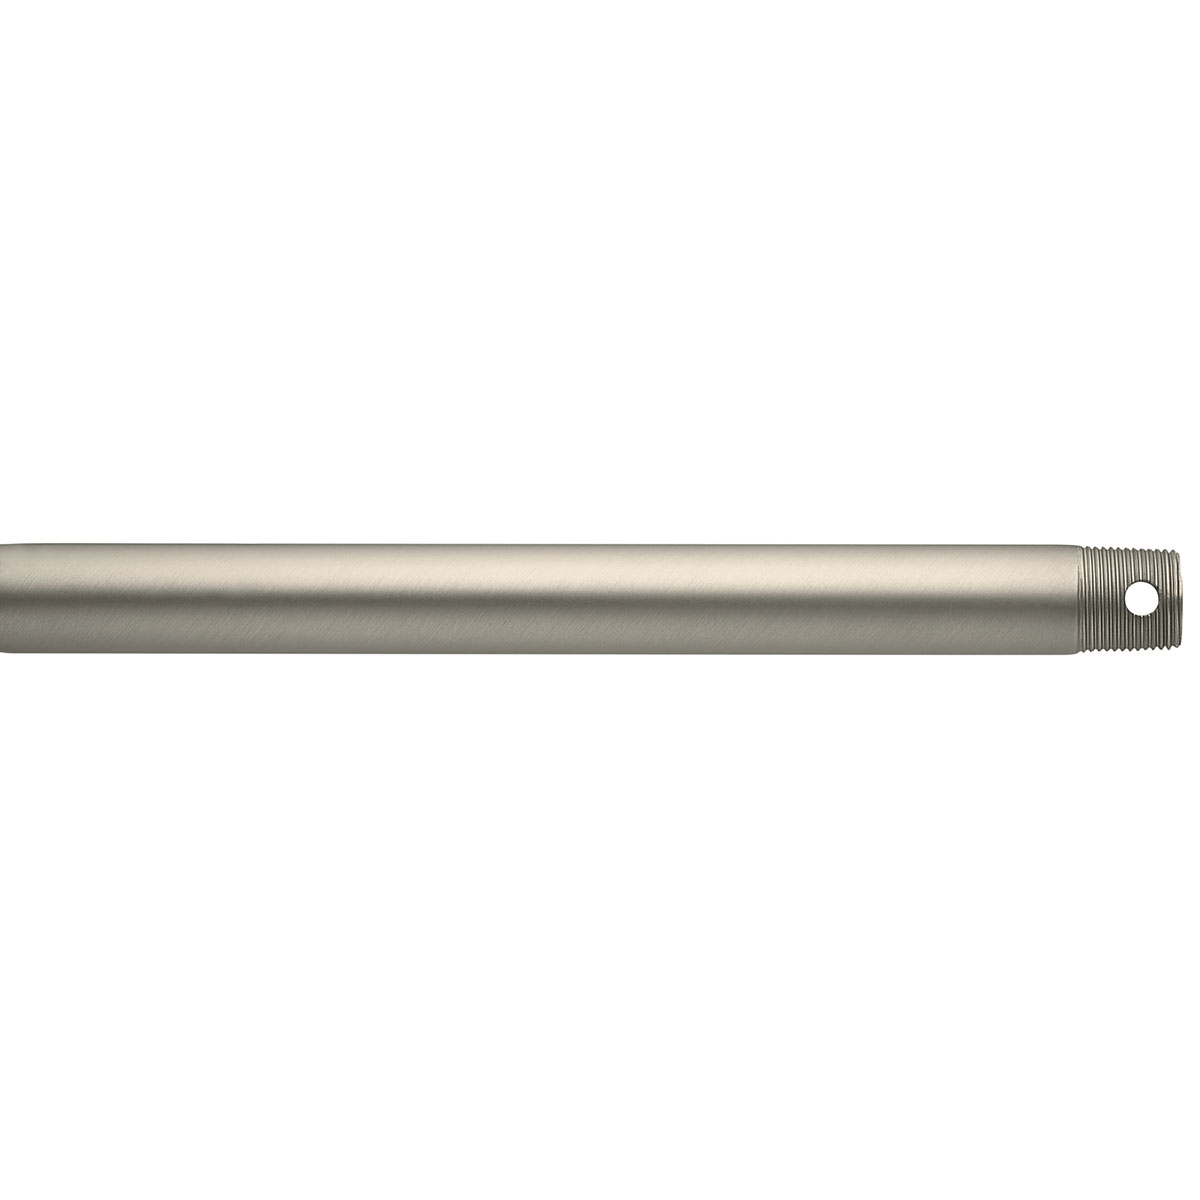 24 inch fan downrod (1 inch O.D.) suggested for 11 foot ceilings in Brushed Nickel